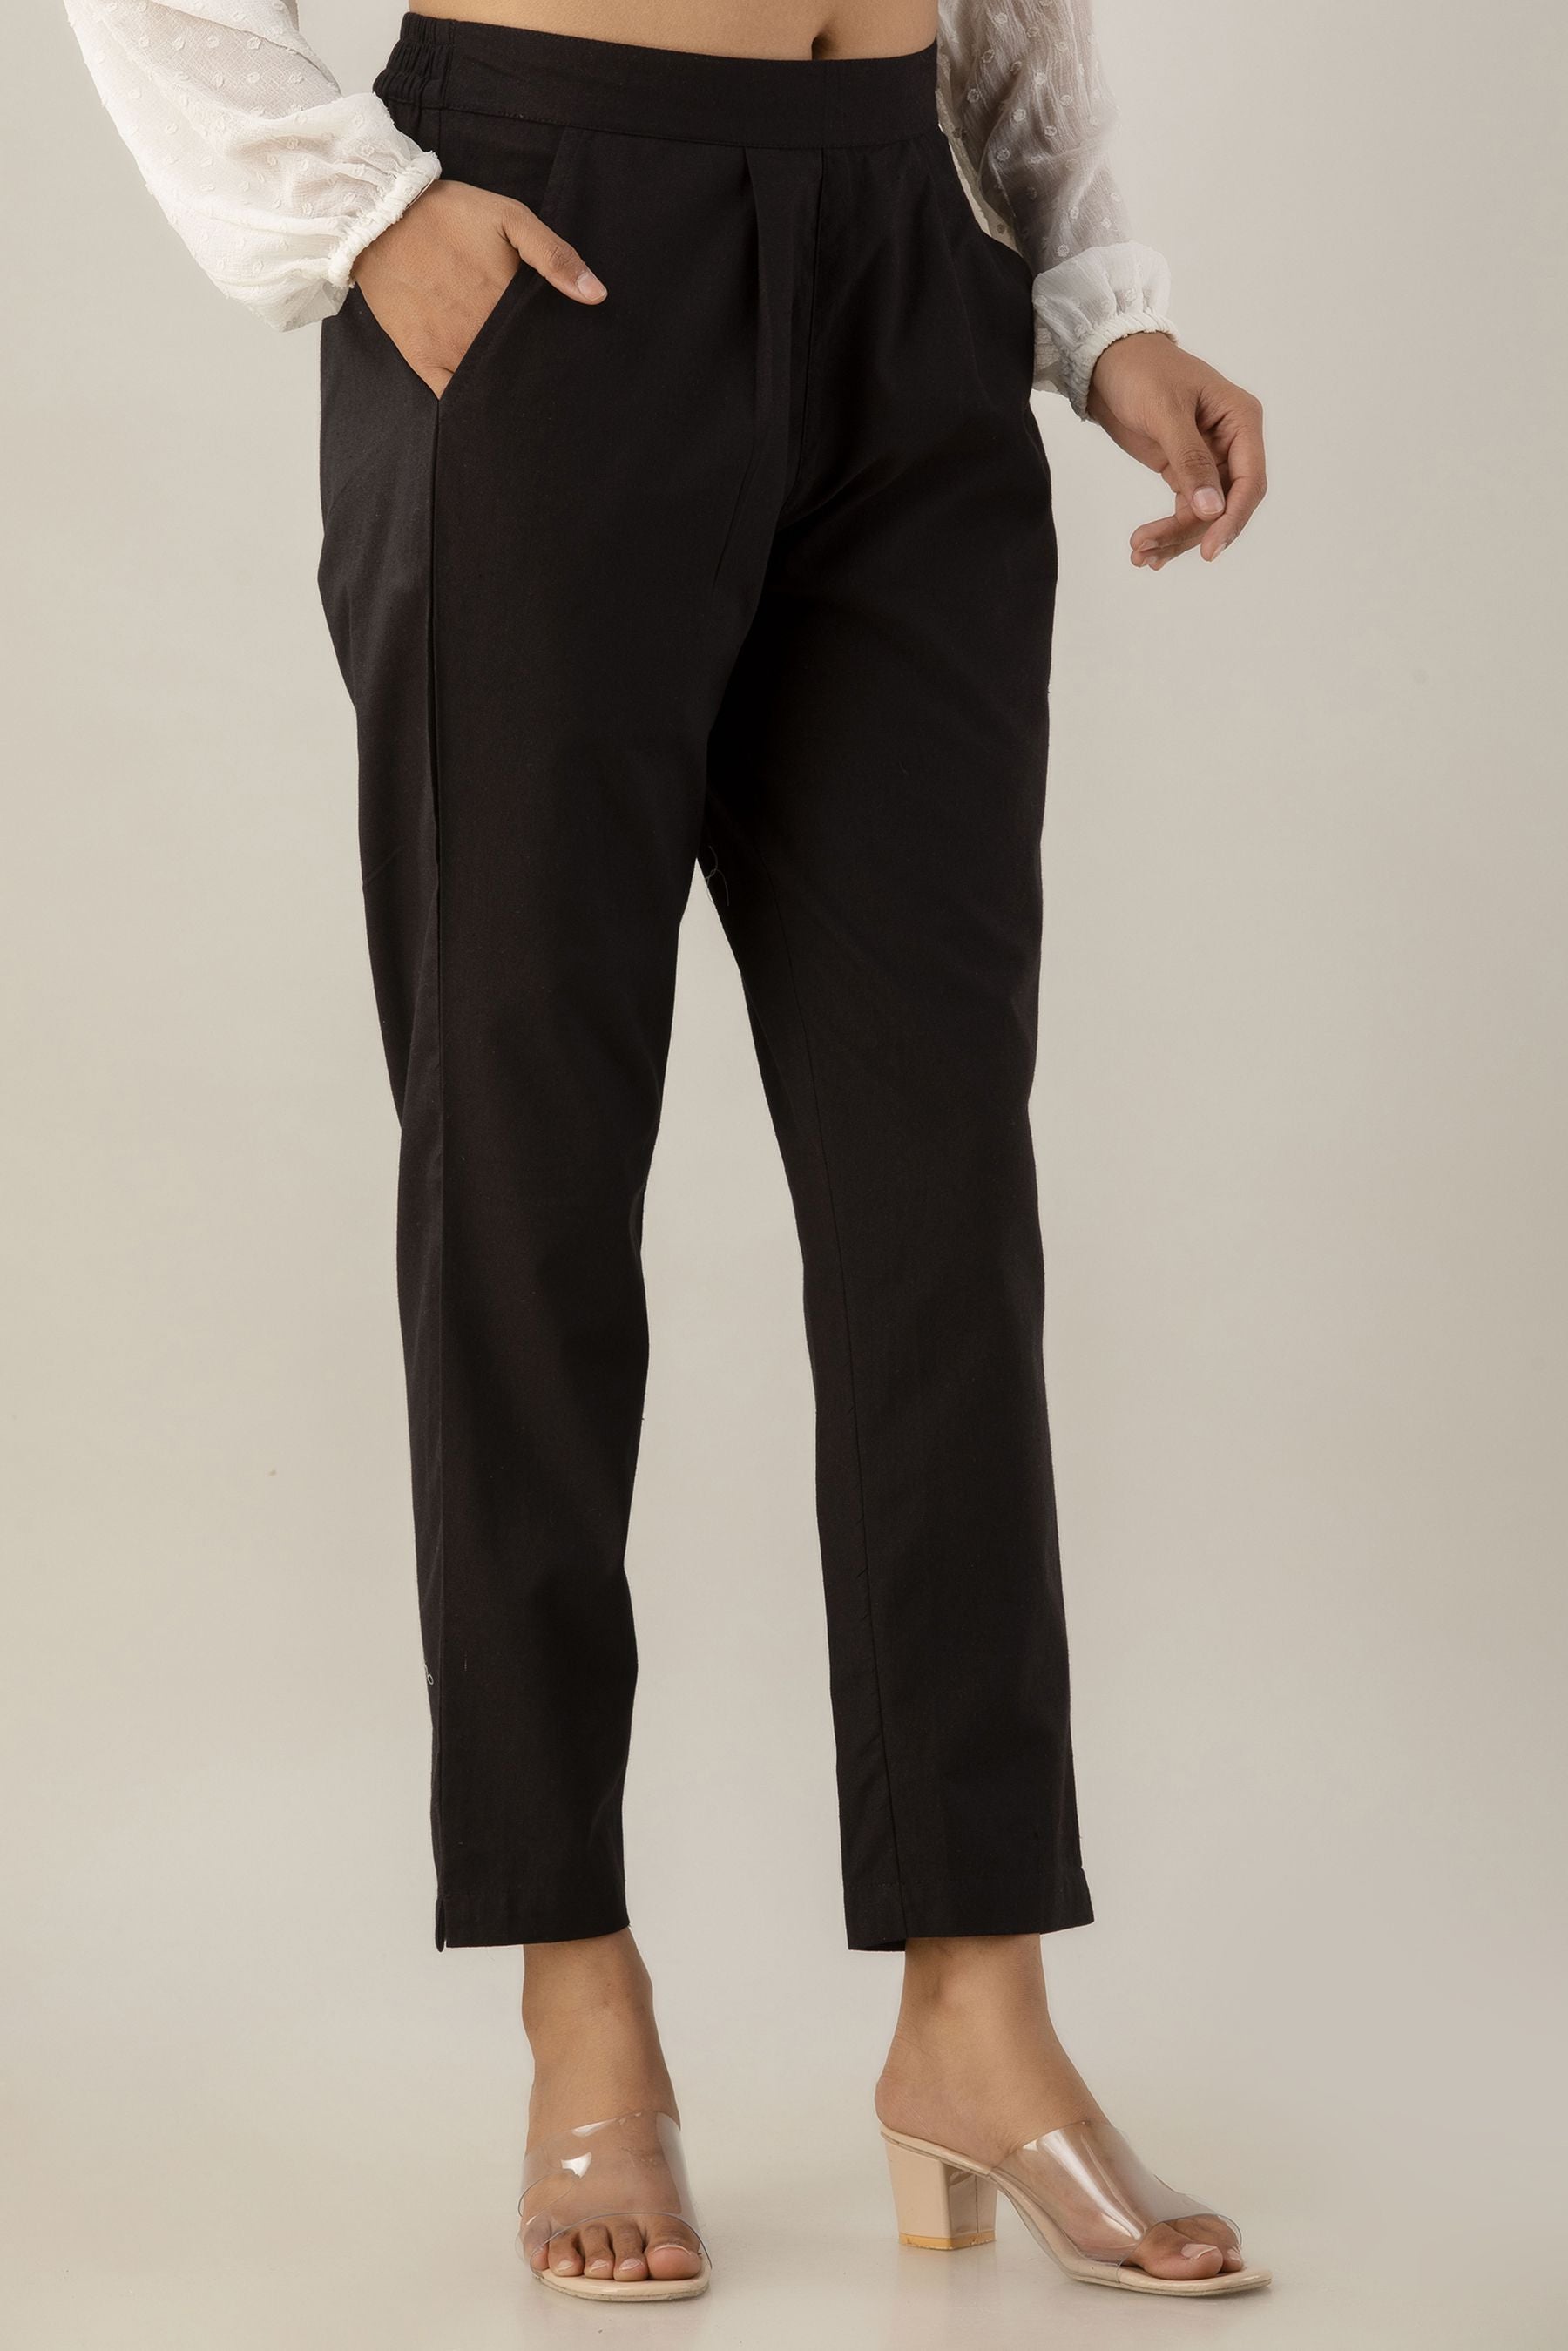 cigarette pants Latest Price Cigarette pants Manufacturers Suppliers  Exporters Wholesalers in India